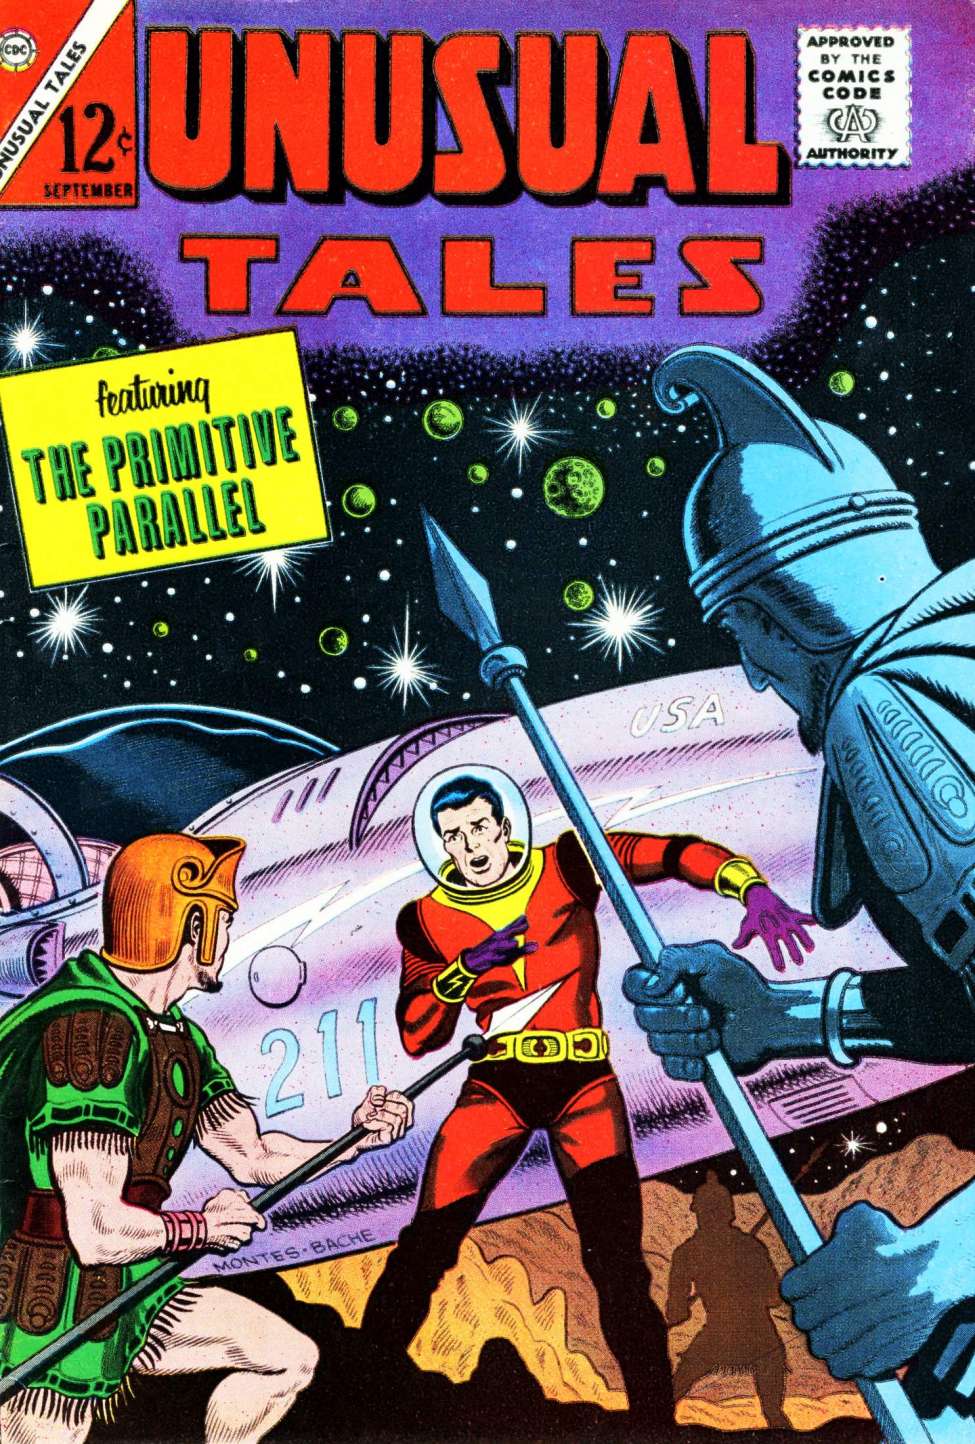 Book Cover For Unusual Tales 41 (alt) - Version 2